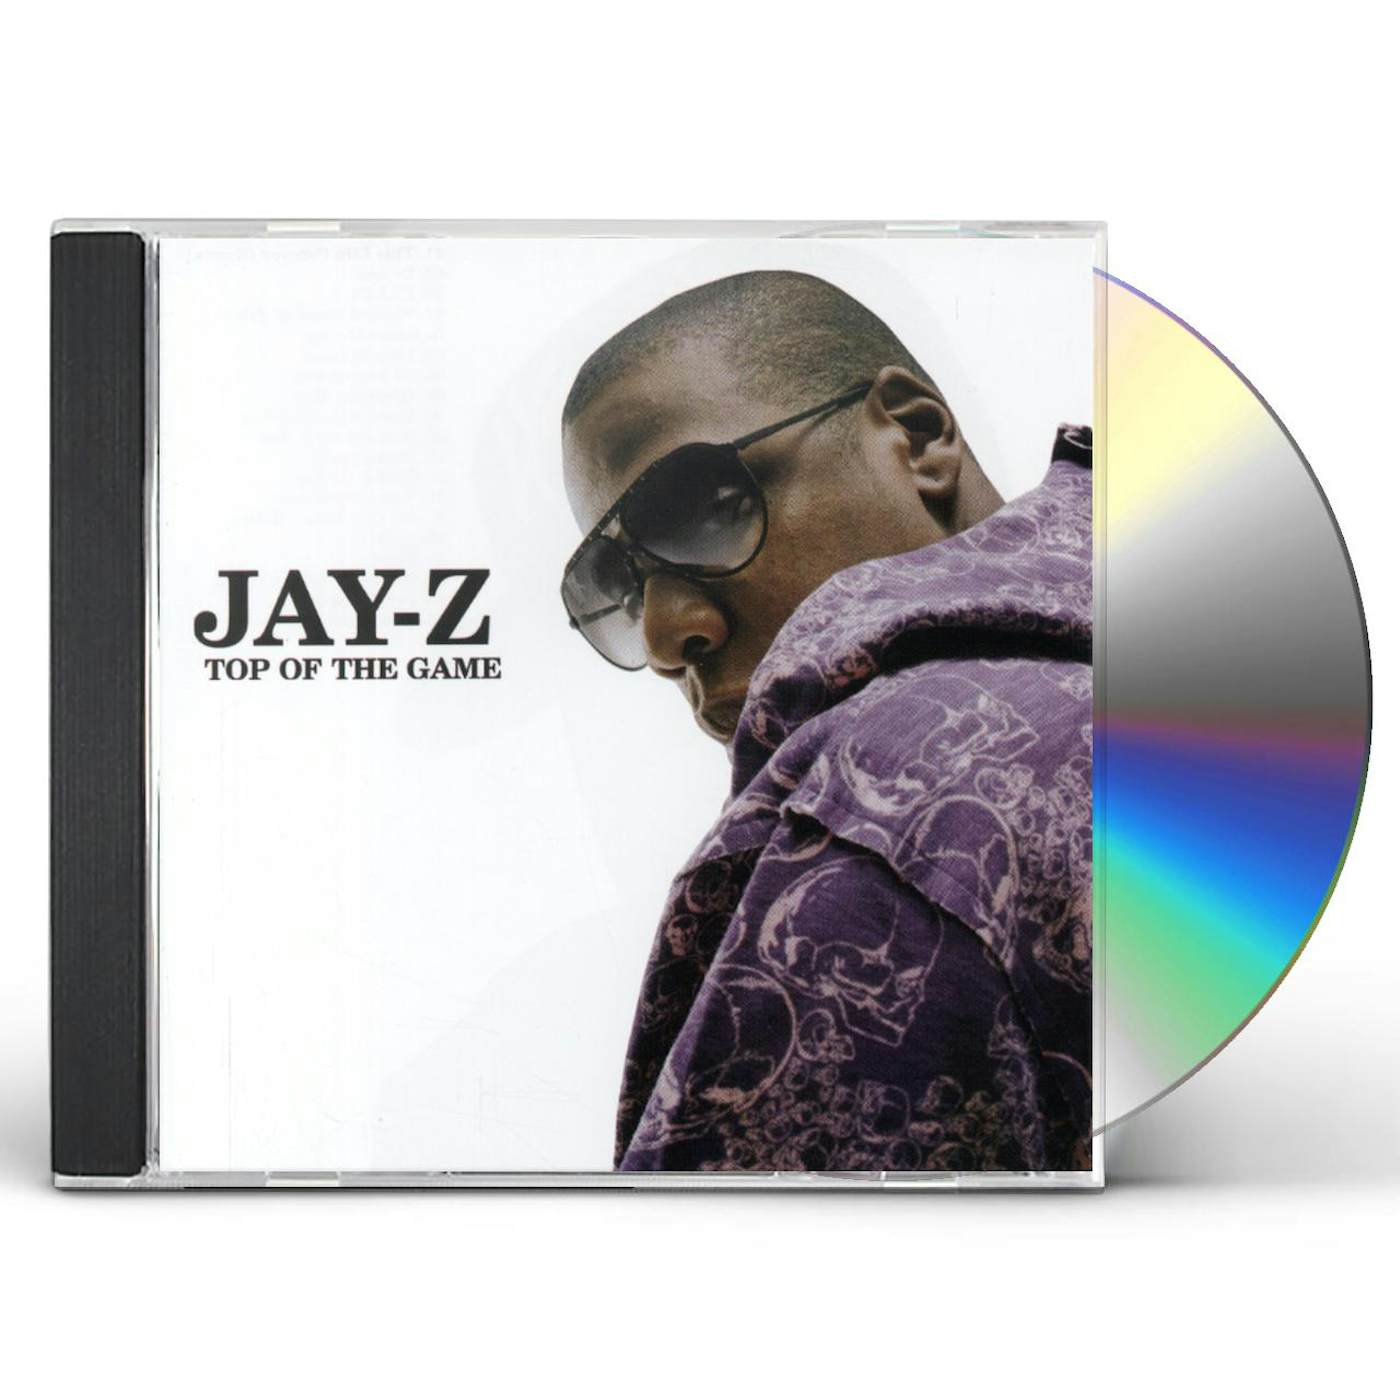 JAY-Z TOP OF THE GAME CD